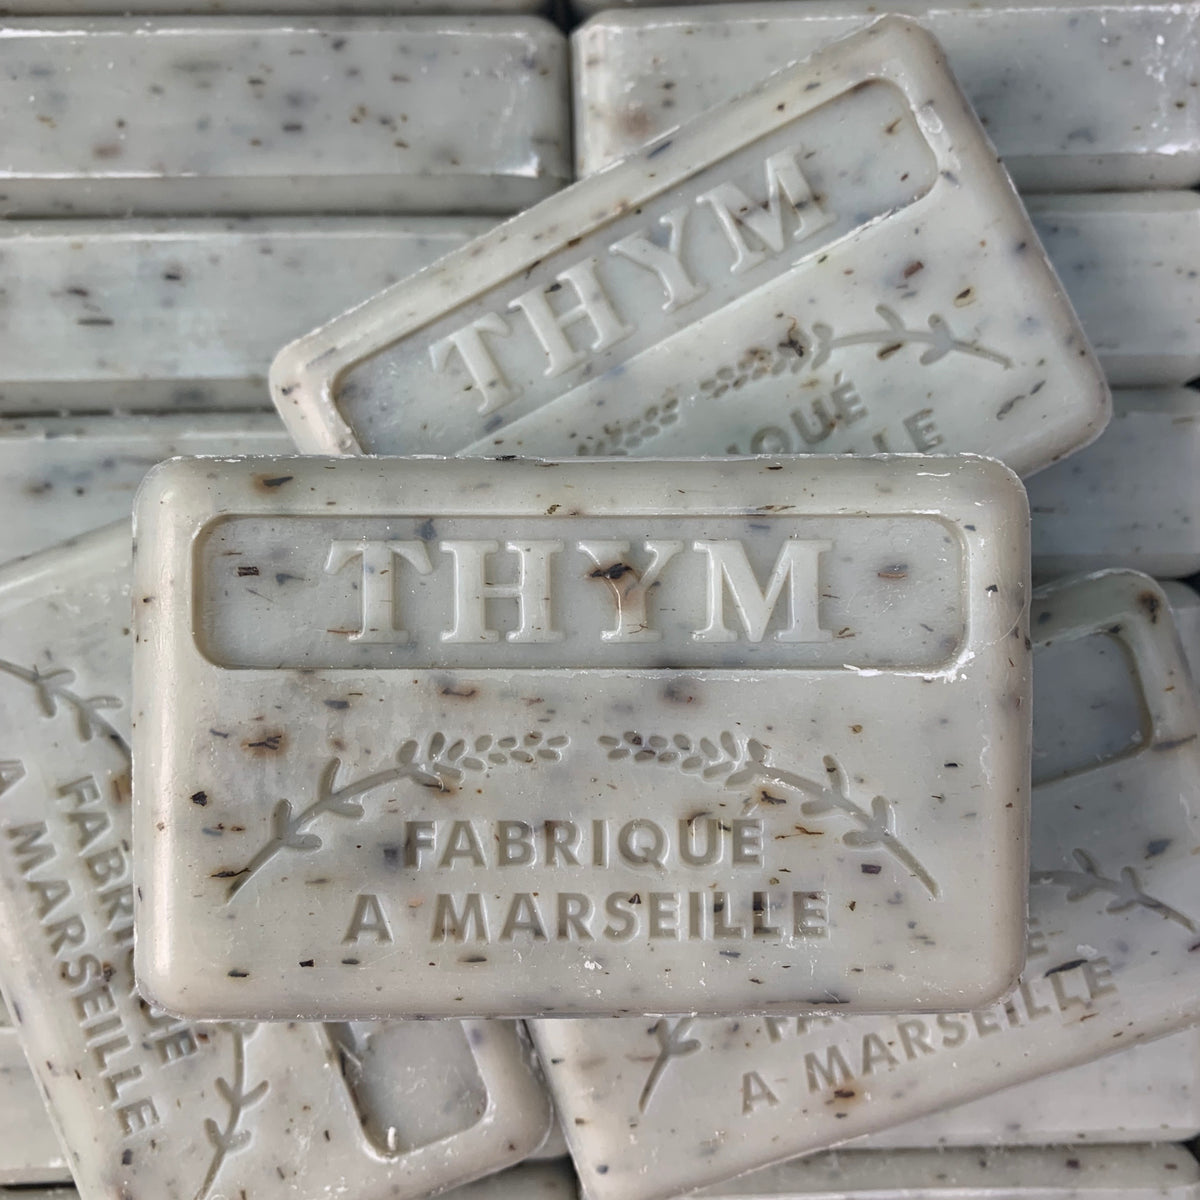 thyme french soap marseille